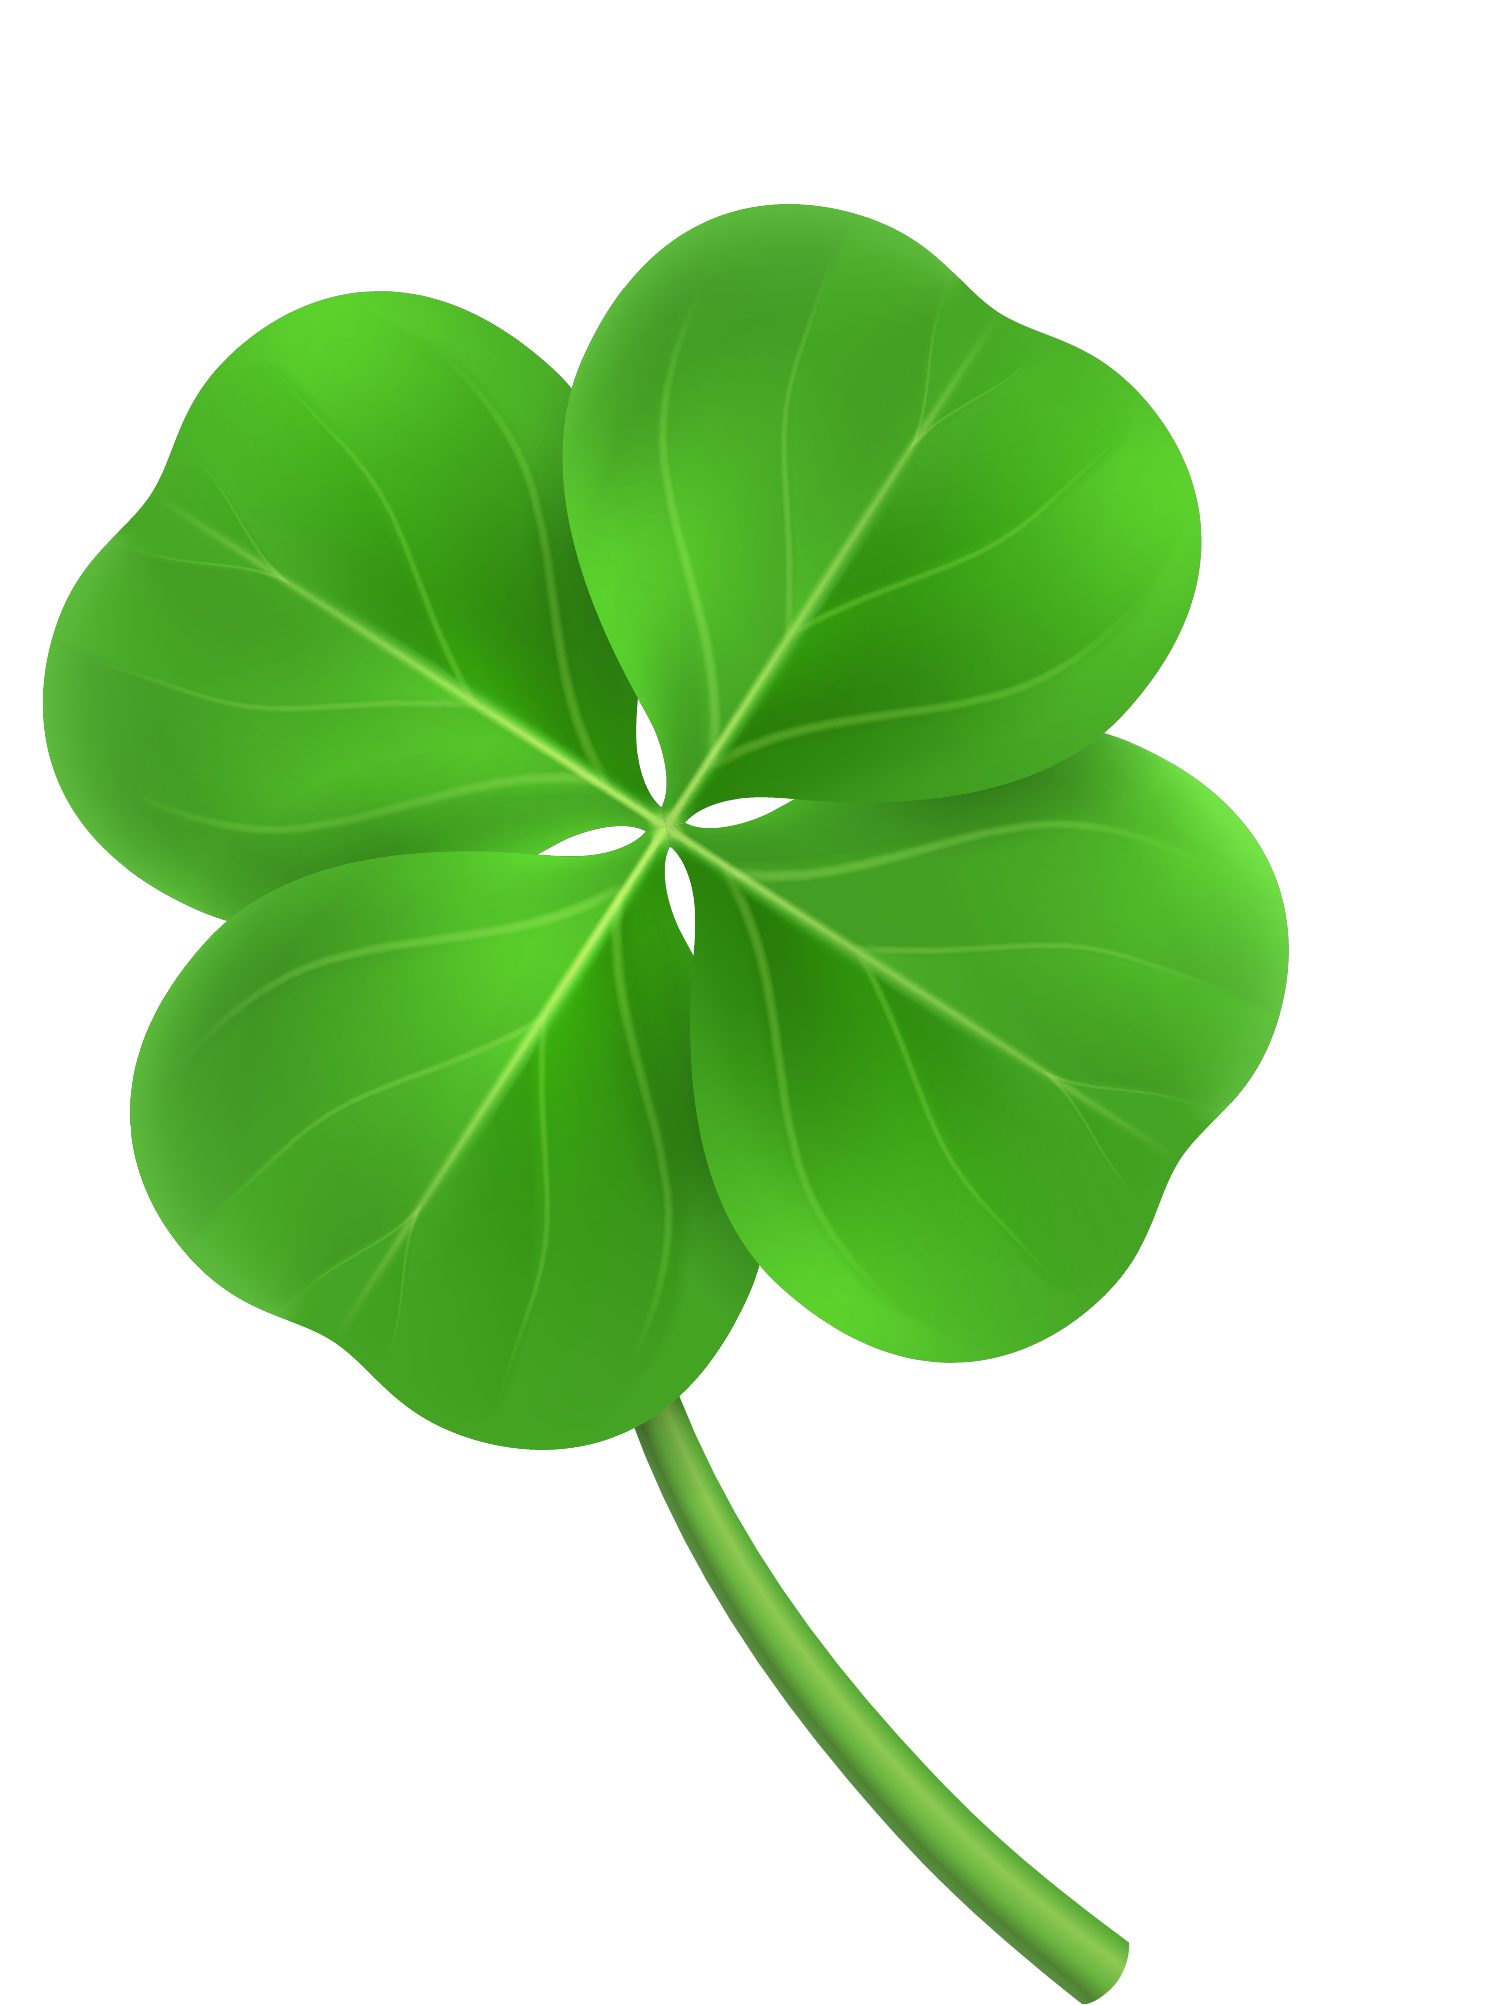 Clover PNG Free Download